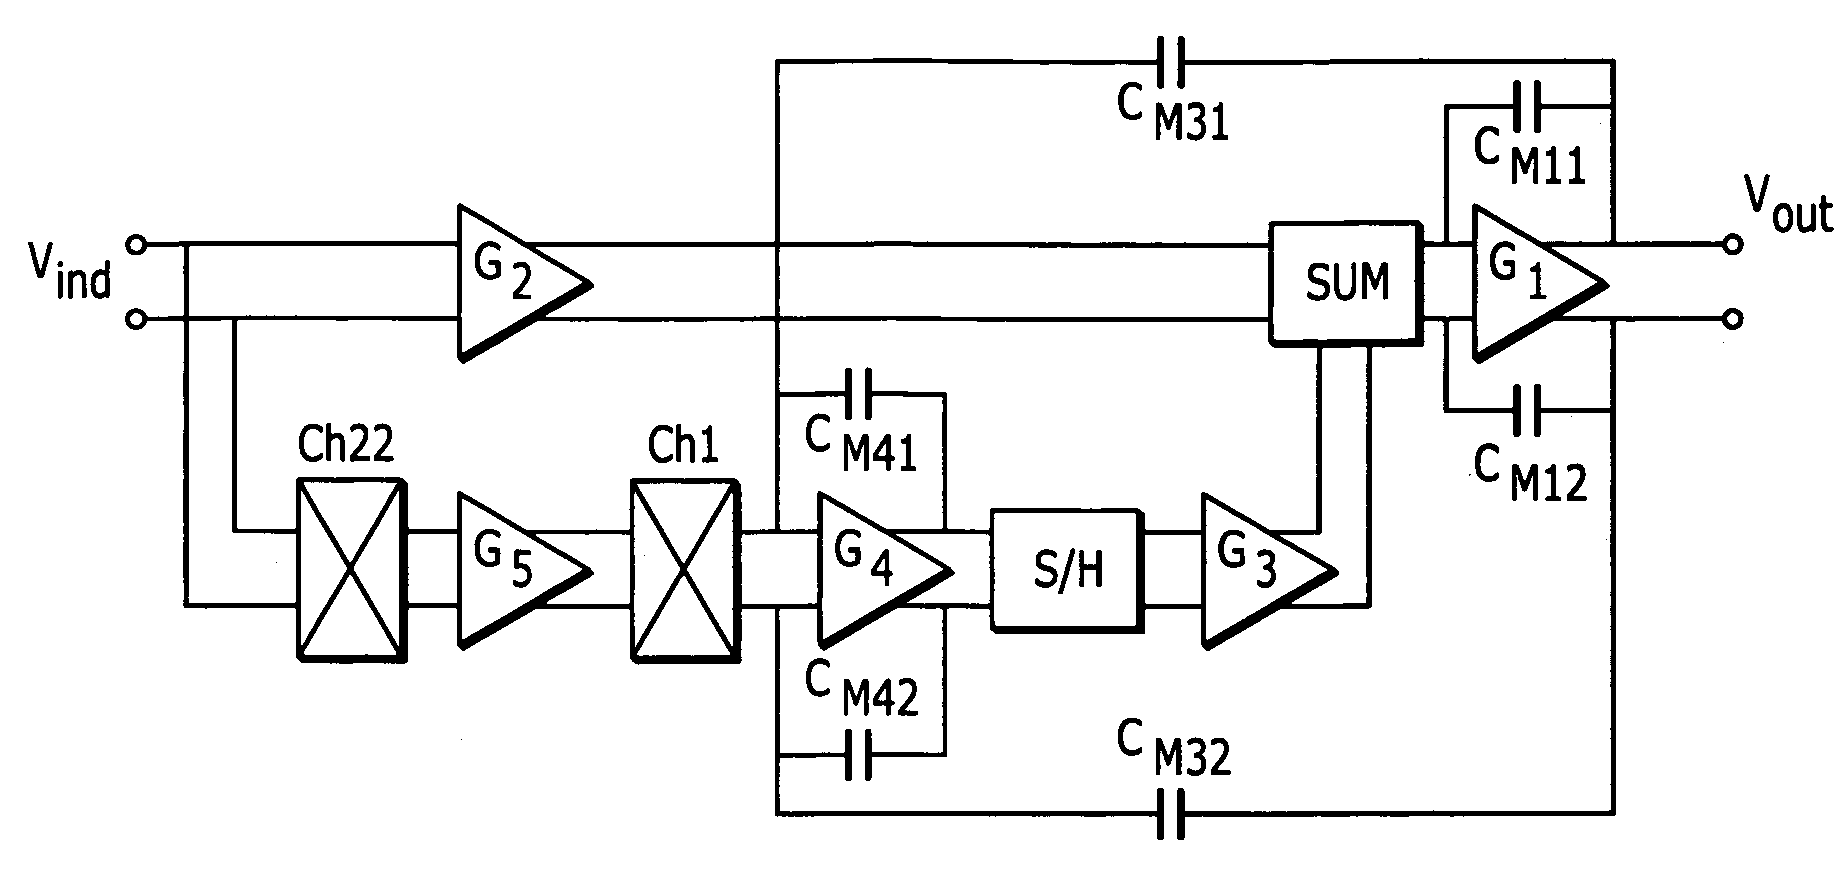 Chopper stabilized amplifiers combining low chopper noise and linear frequency characteristics